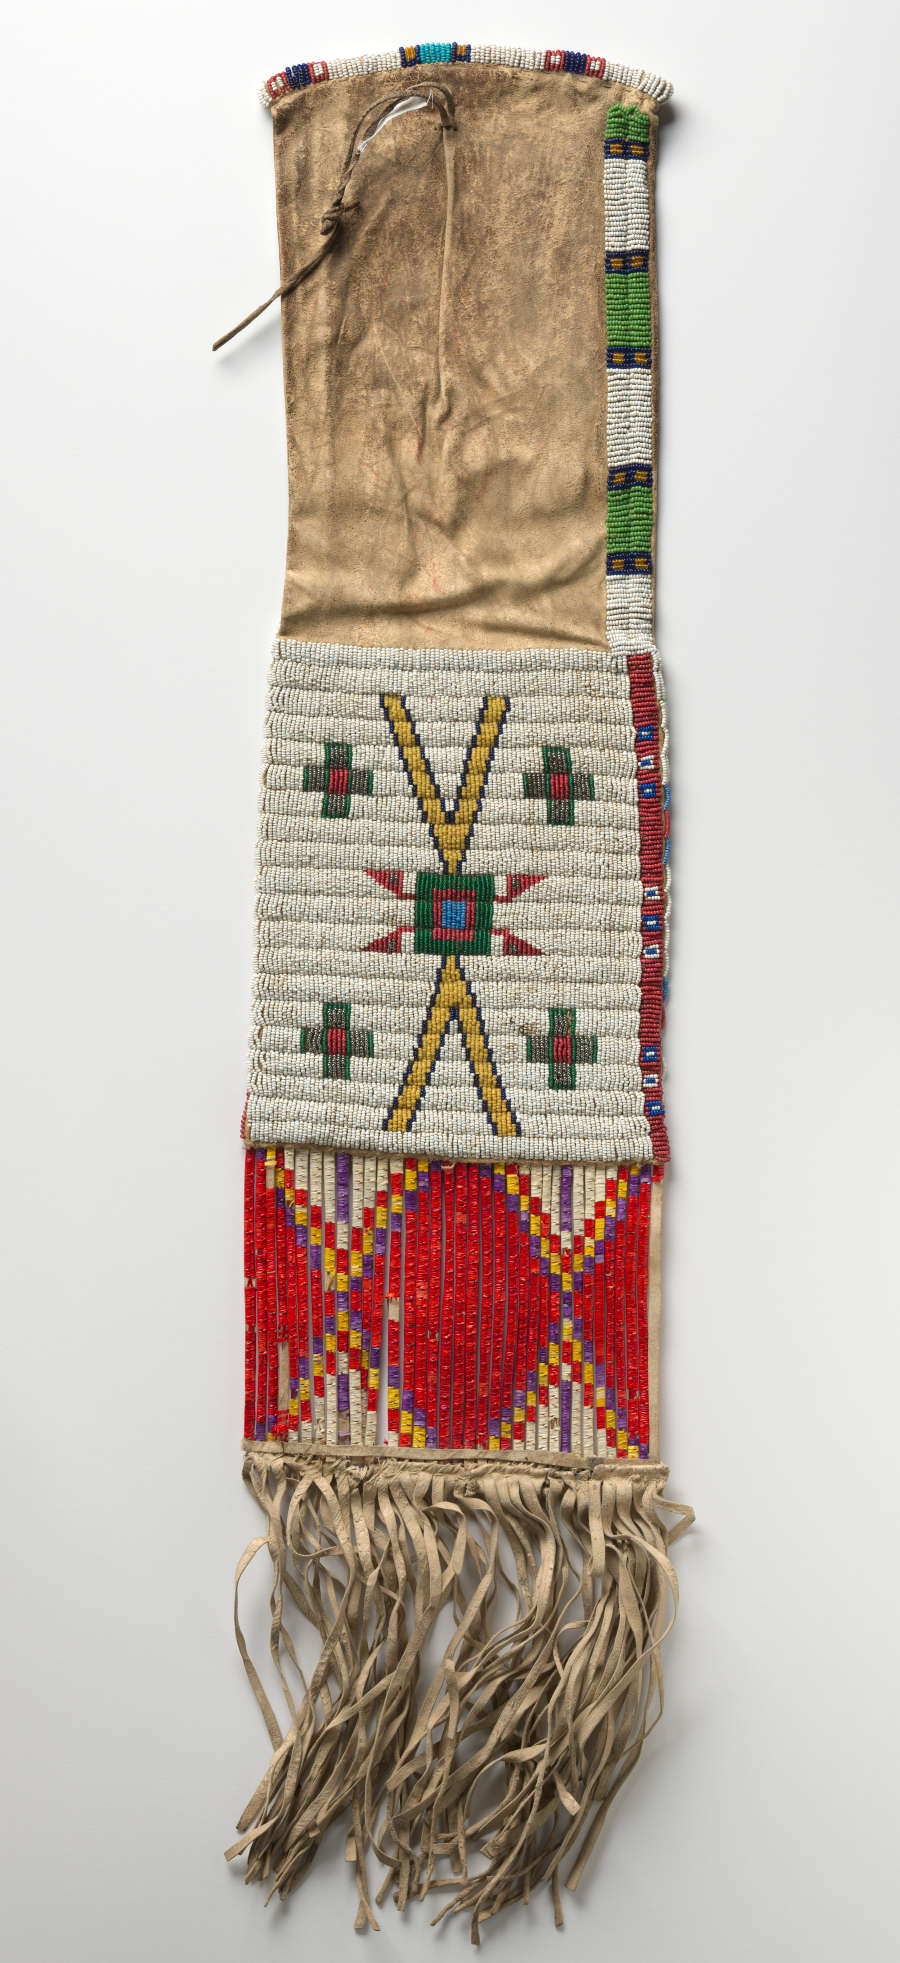 Long deerskin case with geometrically patterned white, red, blue, yellow, and green beading on the fringed bottom half as well as the sides. A string tie secures its mouth.